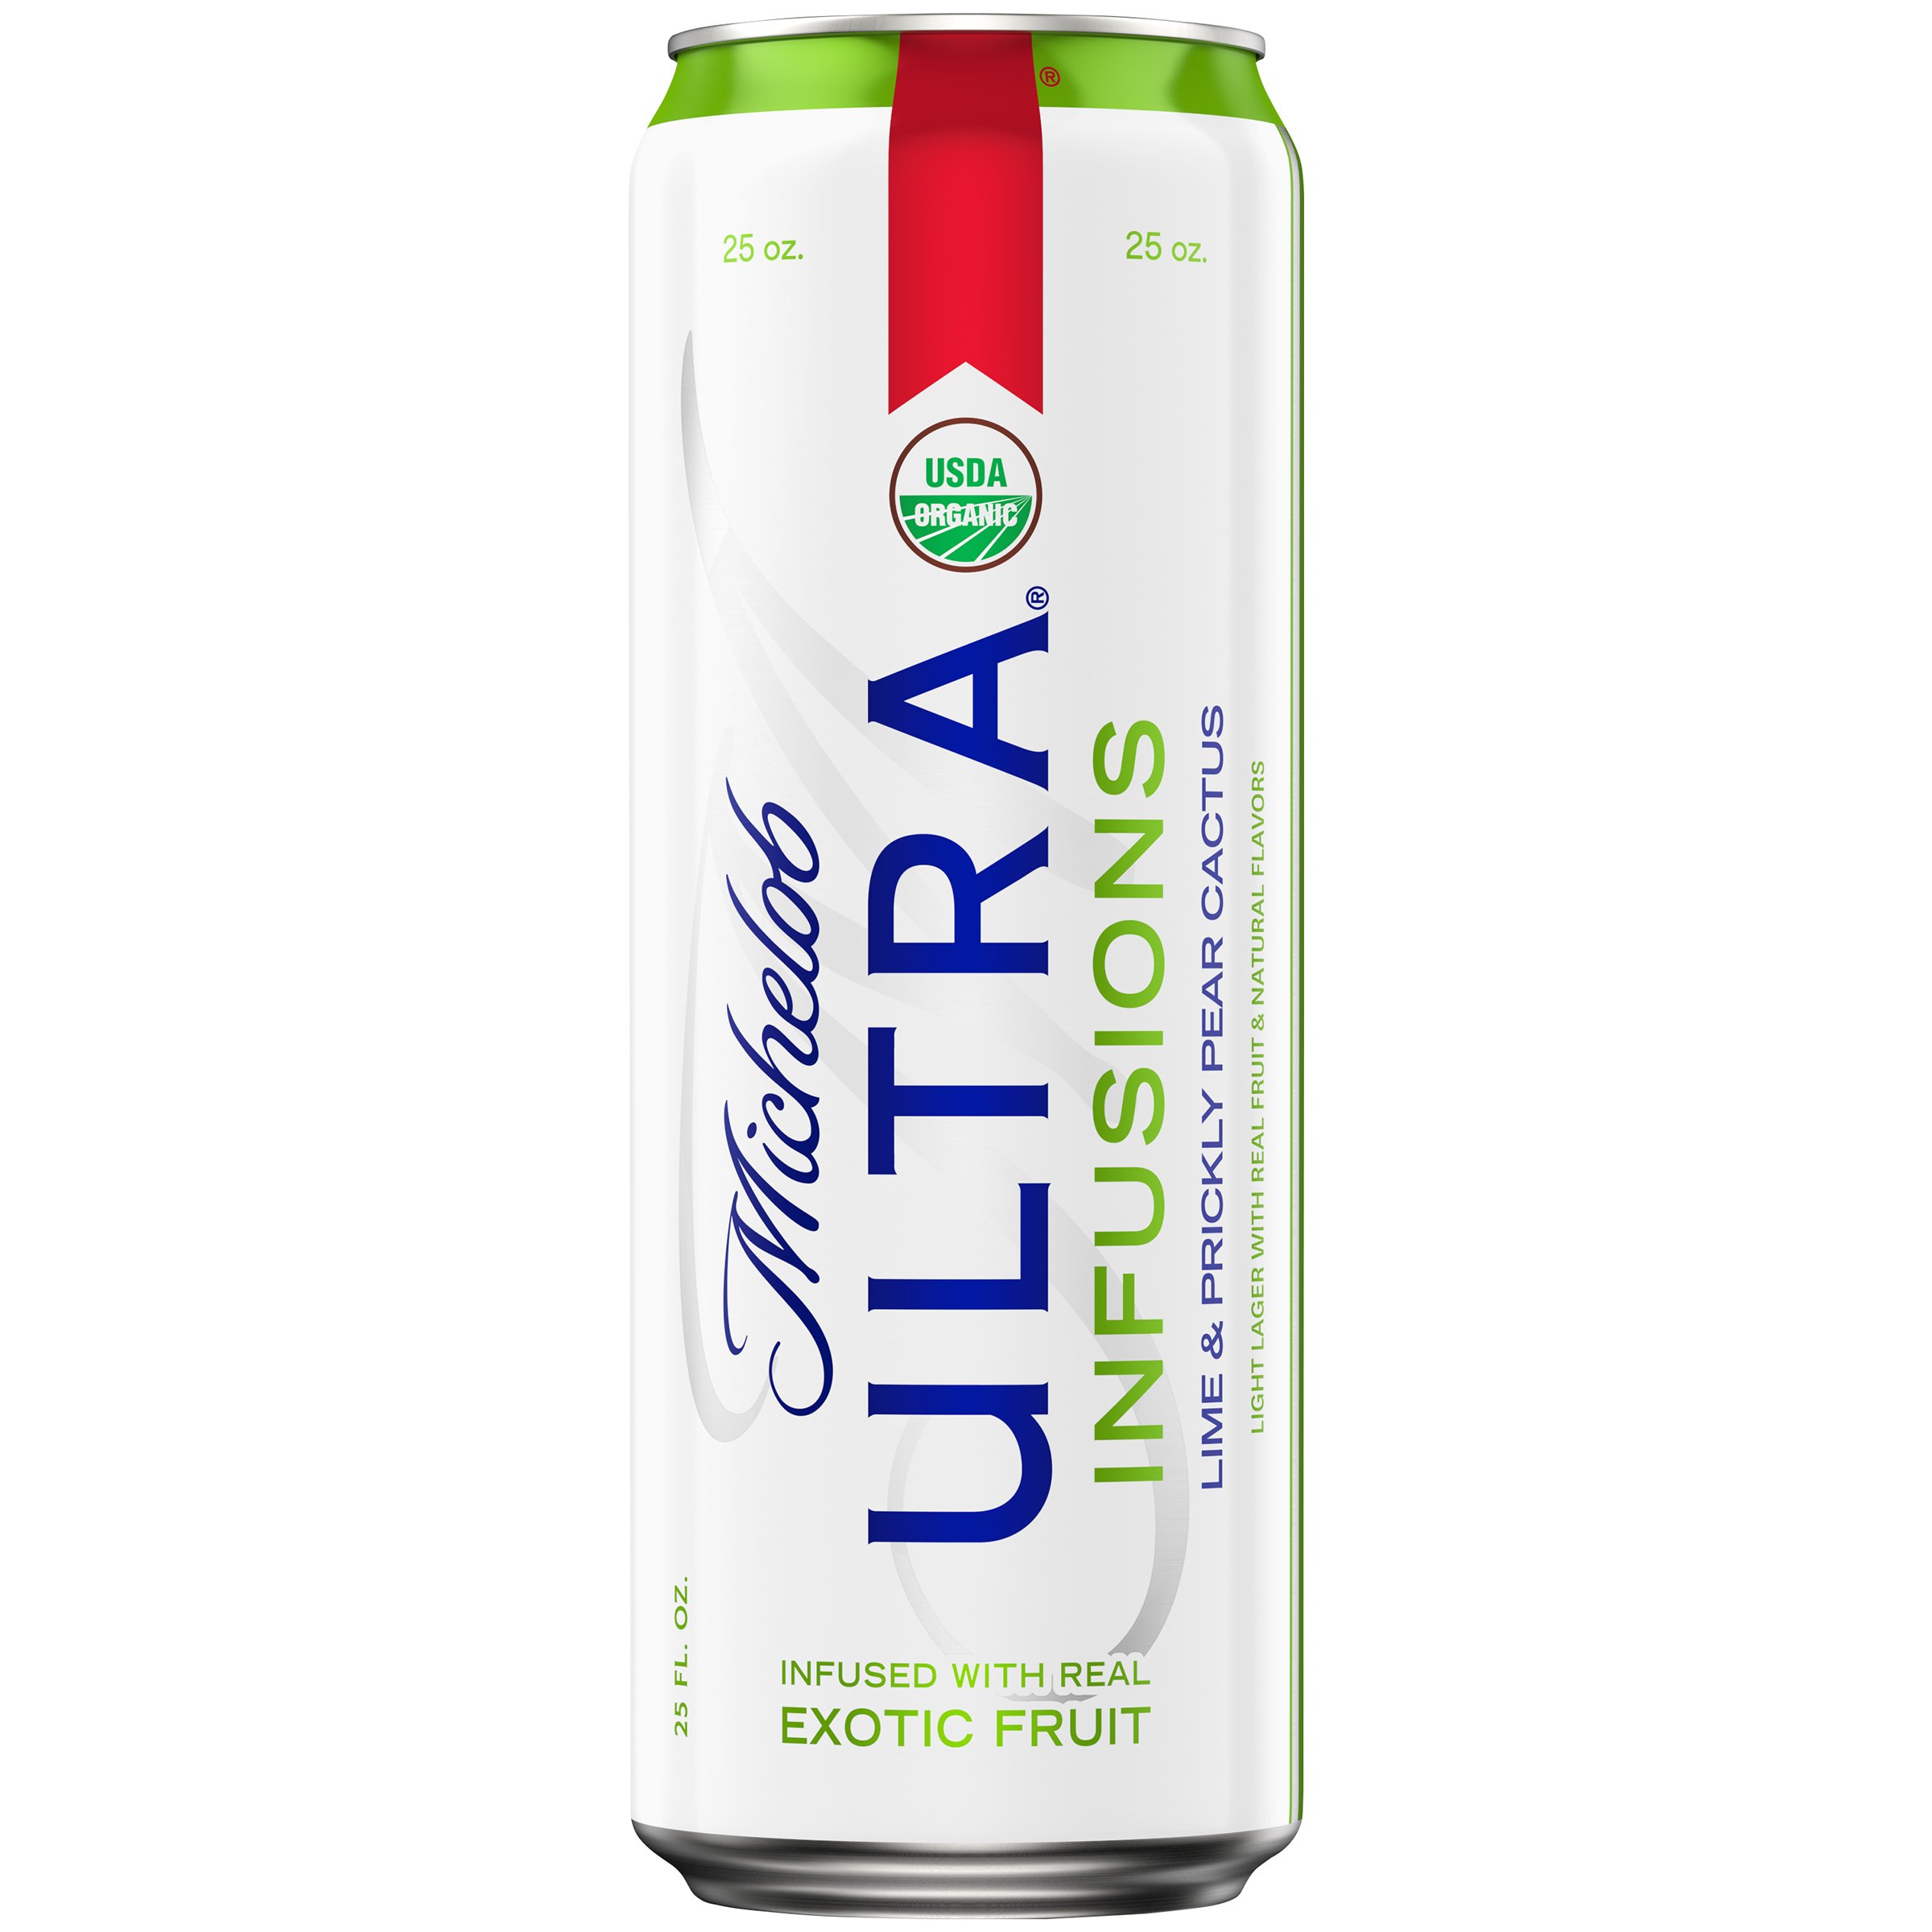 Michelob Ultra Infusions Lime & Prickly Pear Cactus Beer - Shop Beer & Wine  at H-E-B